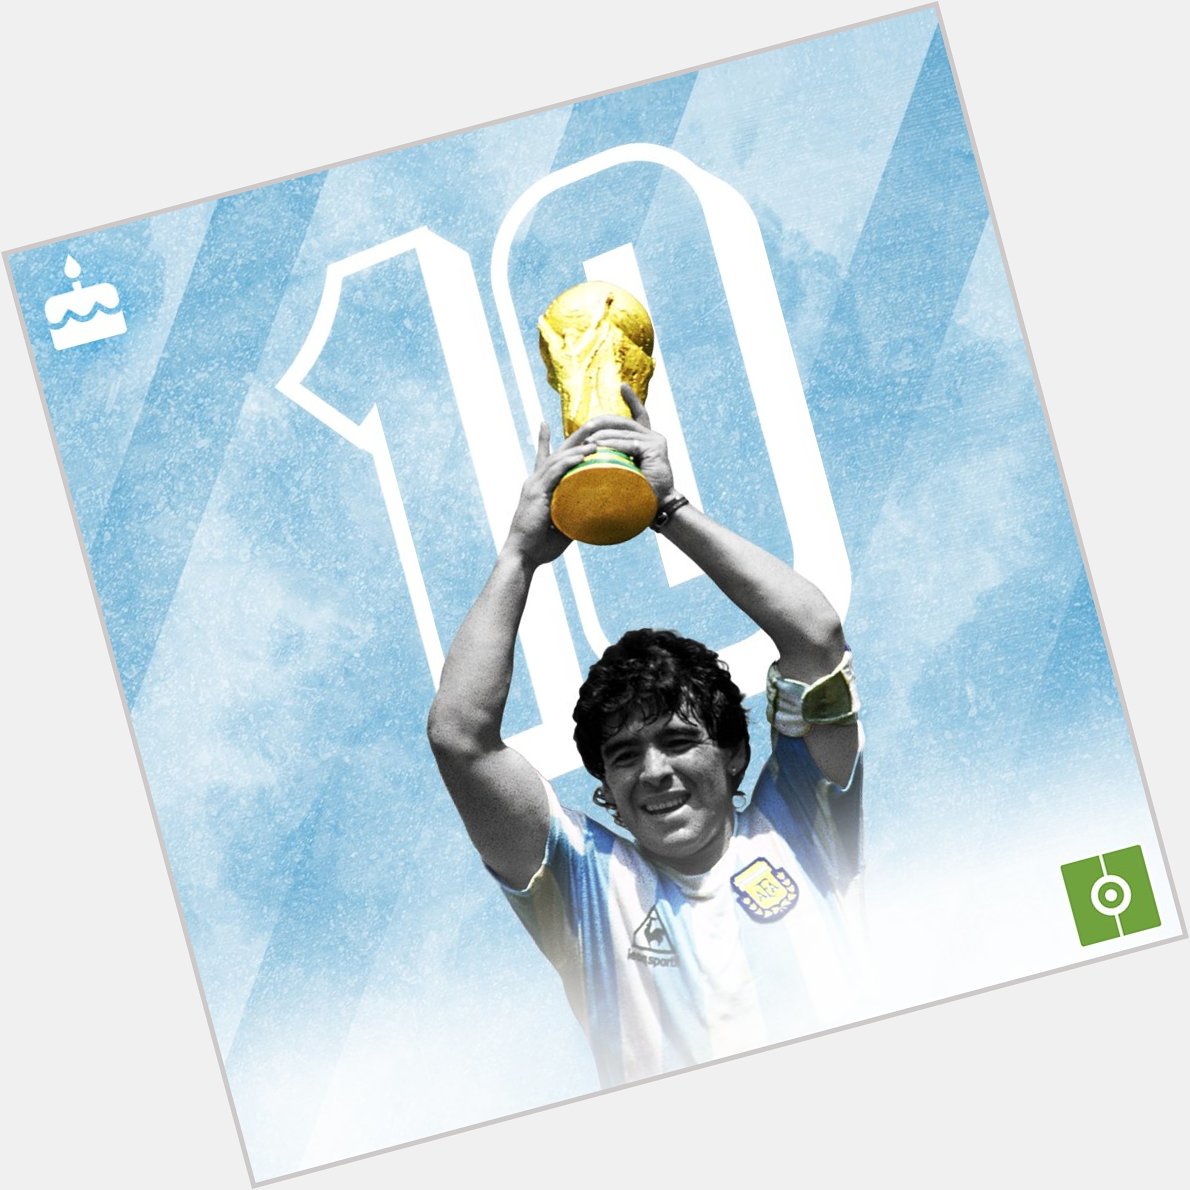 Diego Maradona has turned 59 today! What is your best memory of him? Happy birthday!   